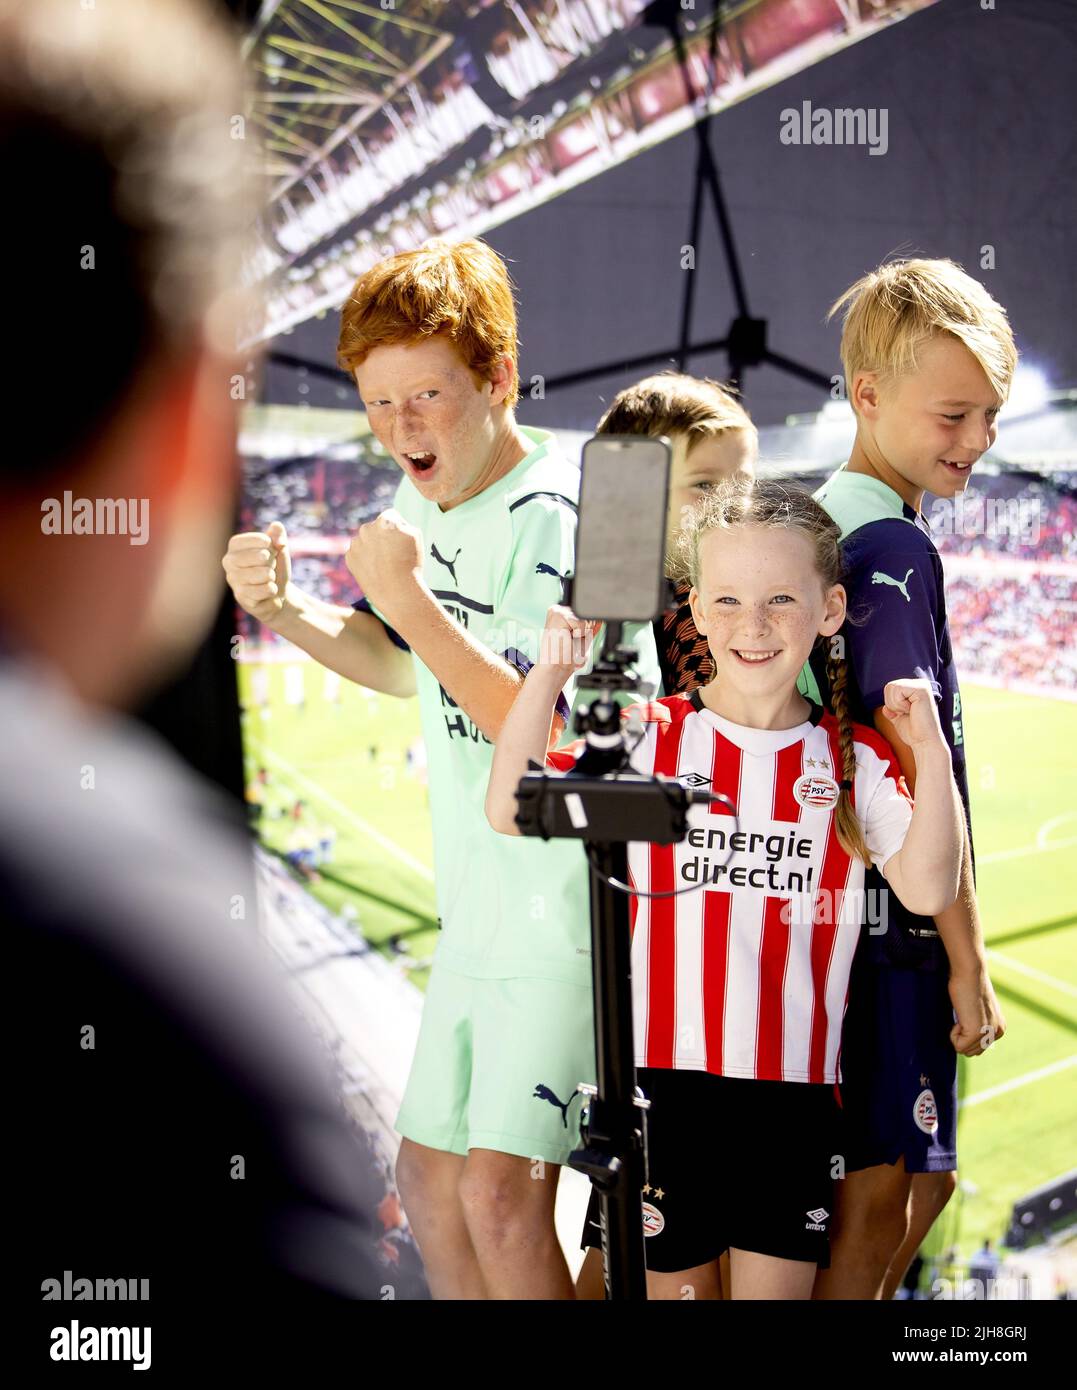 2022-07-16 16:53:39 EINDHOVEN - PSV supporters during the annual PSV Fan Day at the Philips Stadium. After two years, the event can continue for fans. There is, among other things, a Walk of Fame where well-known PSV players are assigned a place during the tile ceremony. ANP KOEN VAN WEEL netherlands out - belgium out Stock Photo